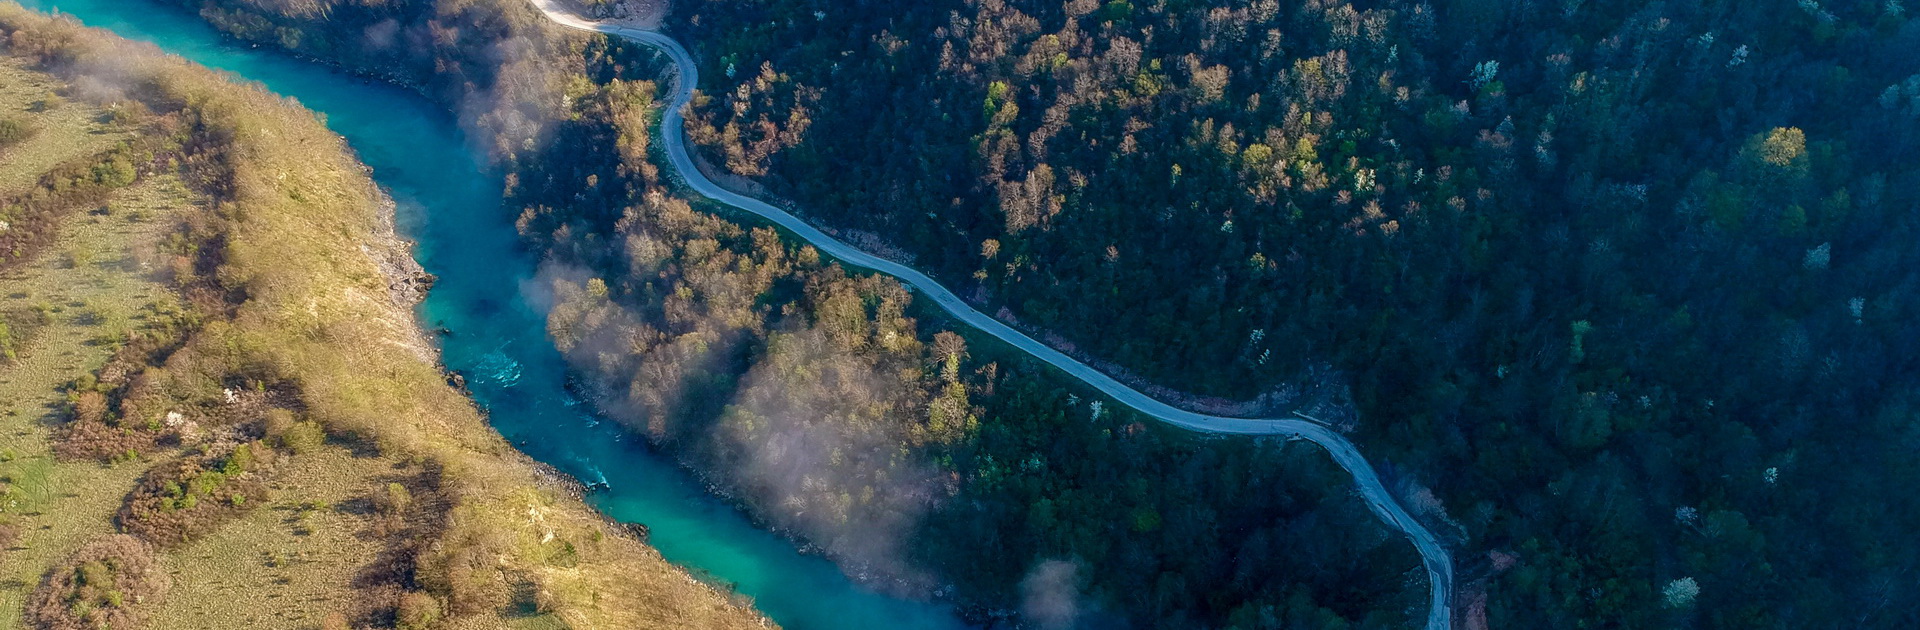 Aerial view of river Drina in Bosnia and Herzegovina, EuropeAerial view of river Drina in Bosnia and Herzegovina, Europe